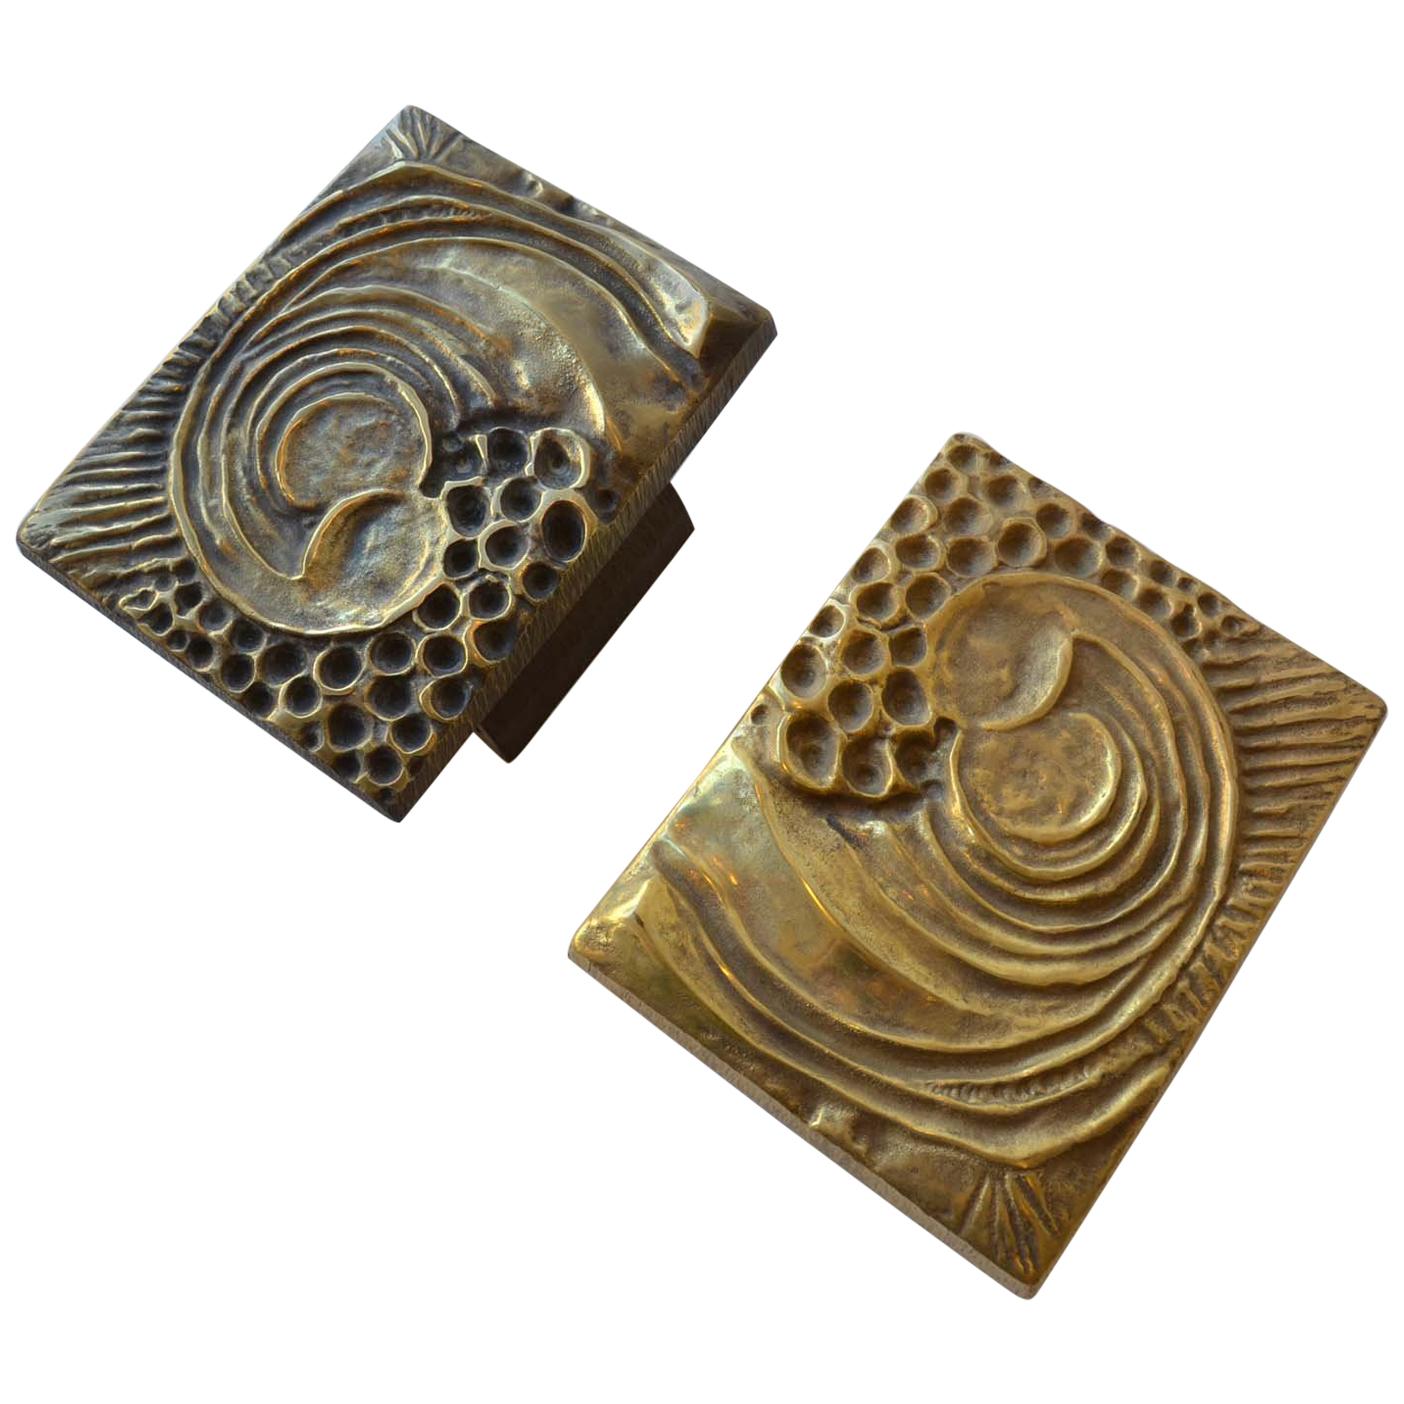 1970s Brutalist Pair of Bronze Push and Pull Door Handles with Abstract Relief